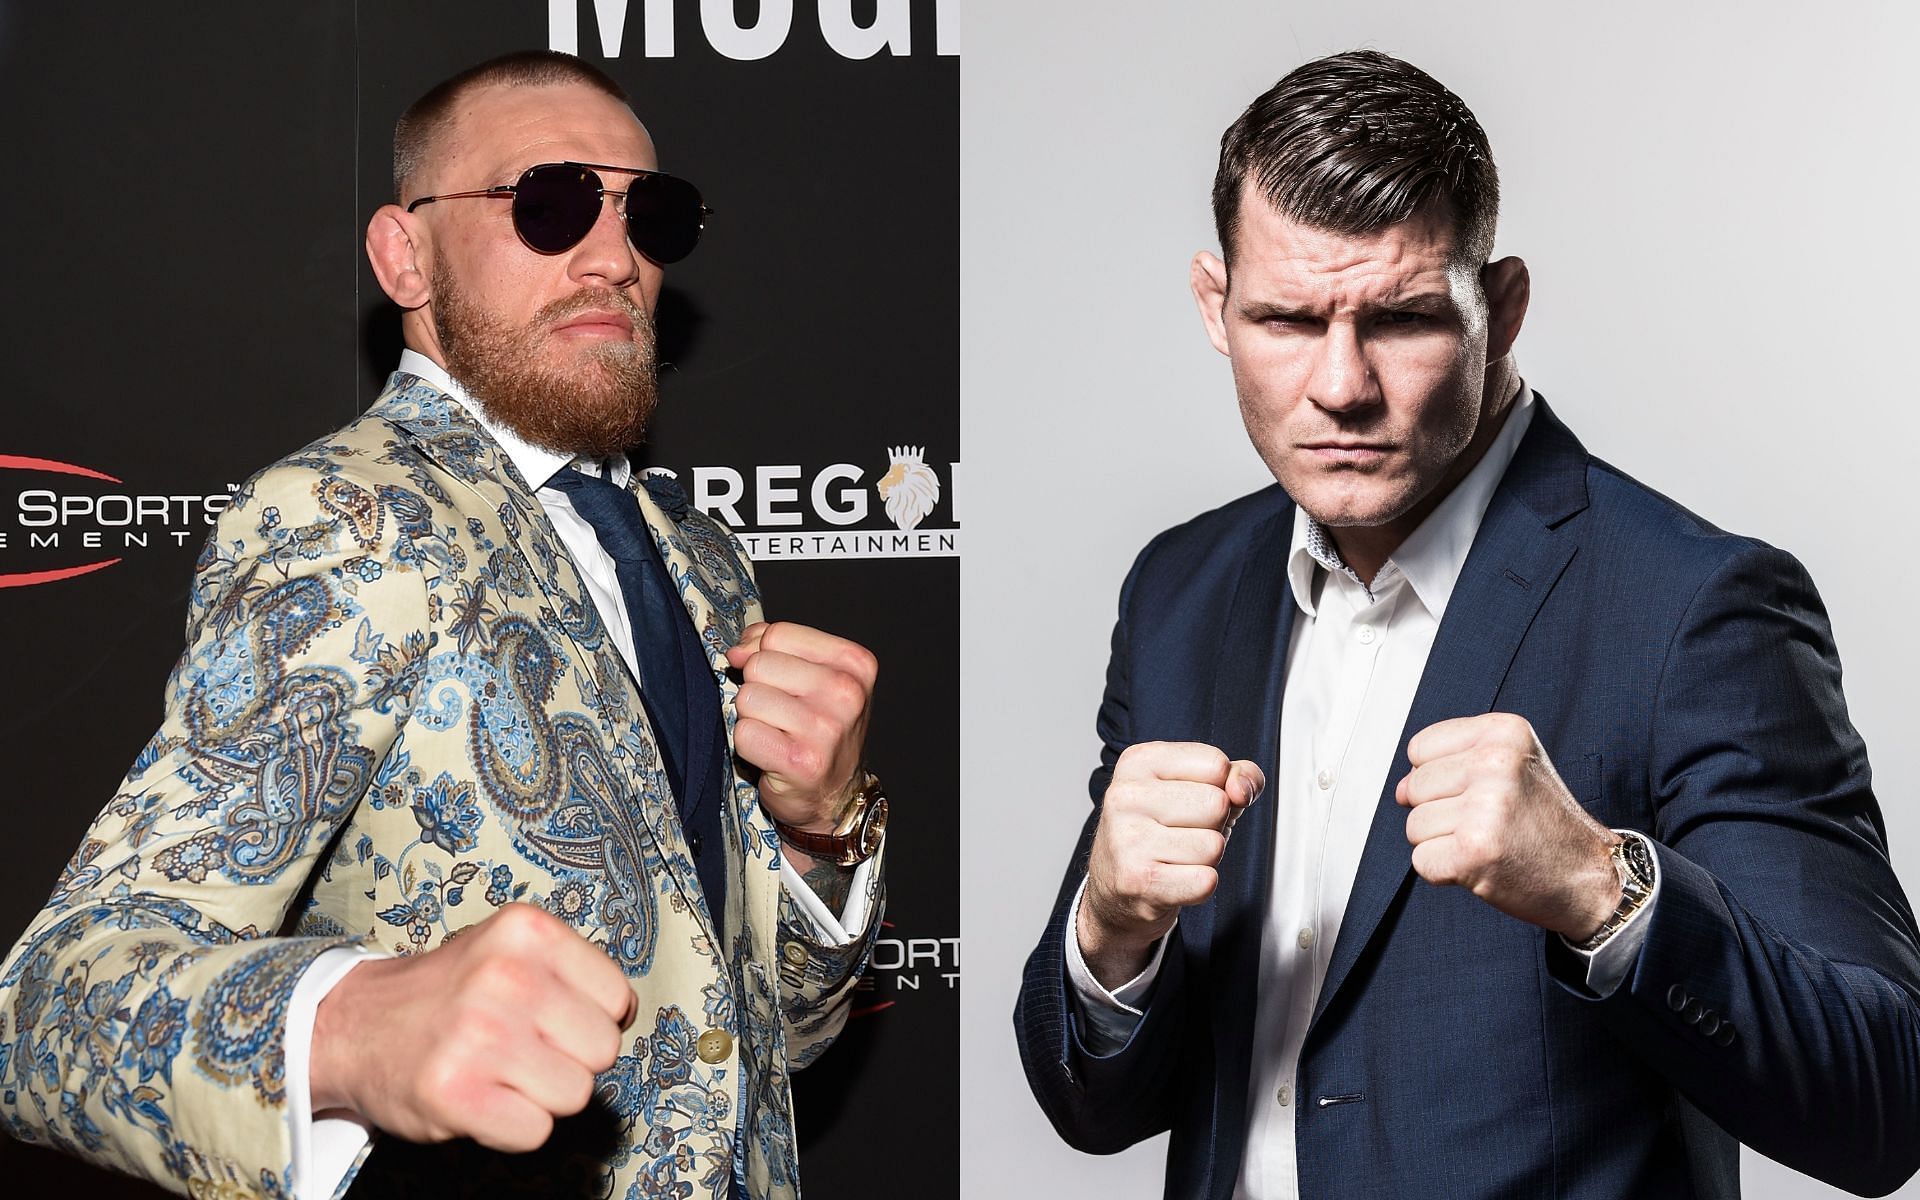 Conor McGregor (left) and Michael Bisping (right). [Images courtesy: Getty Images]